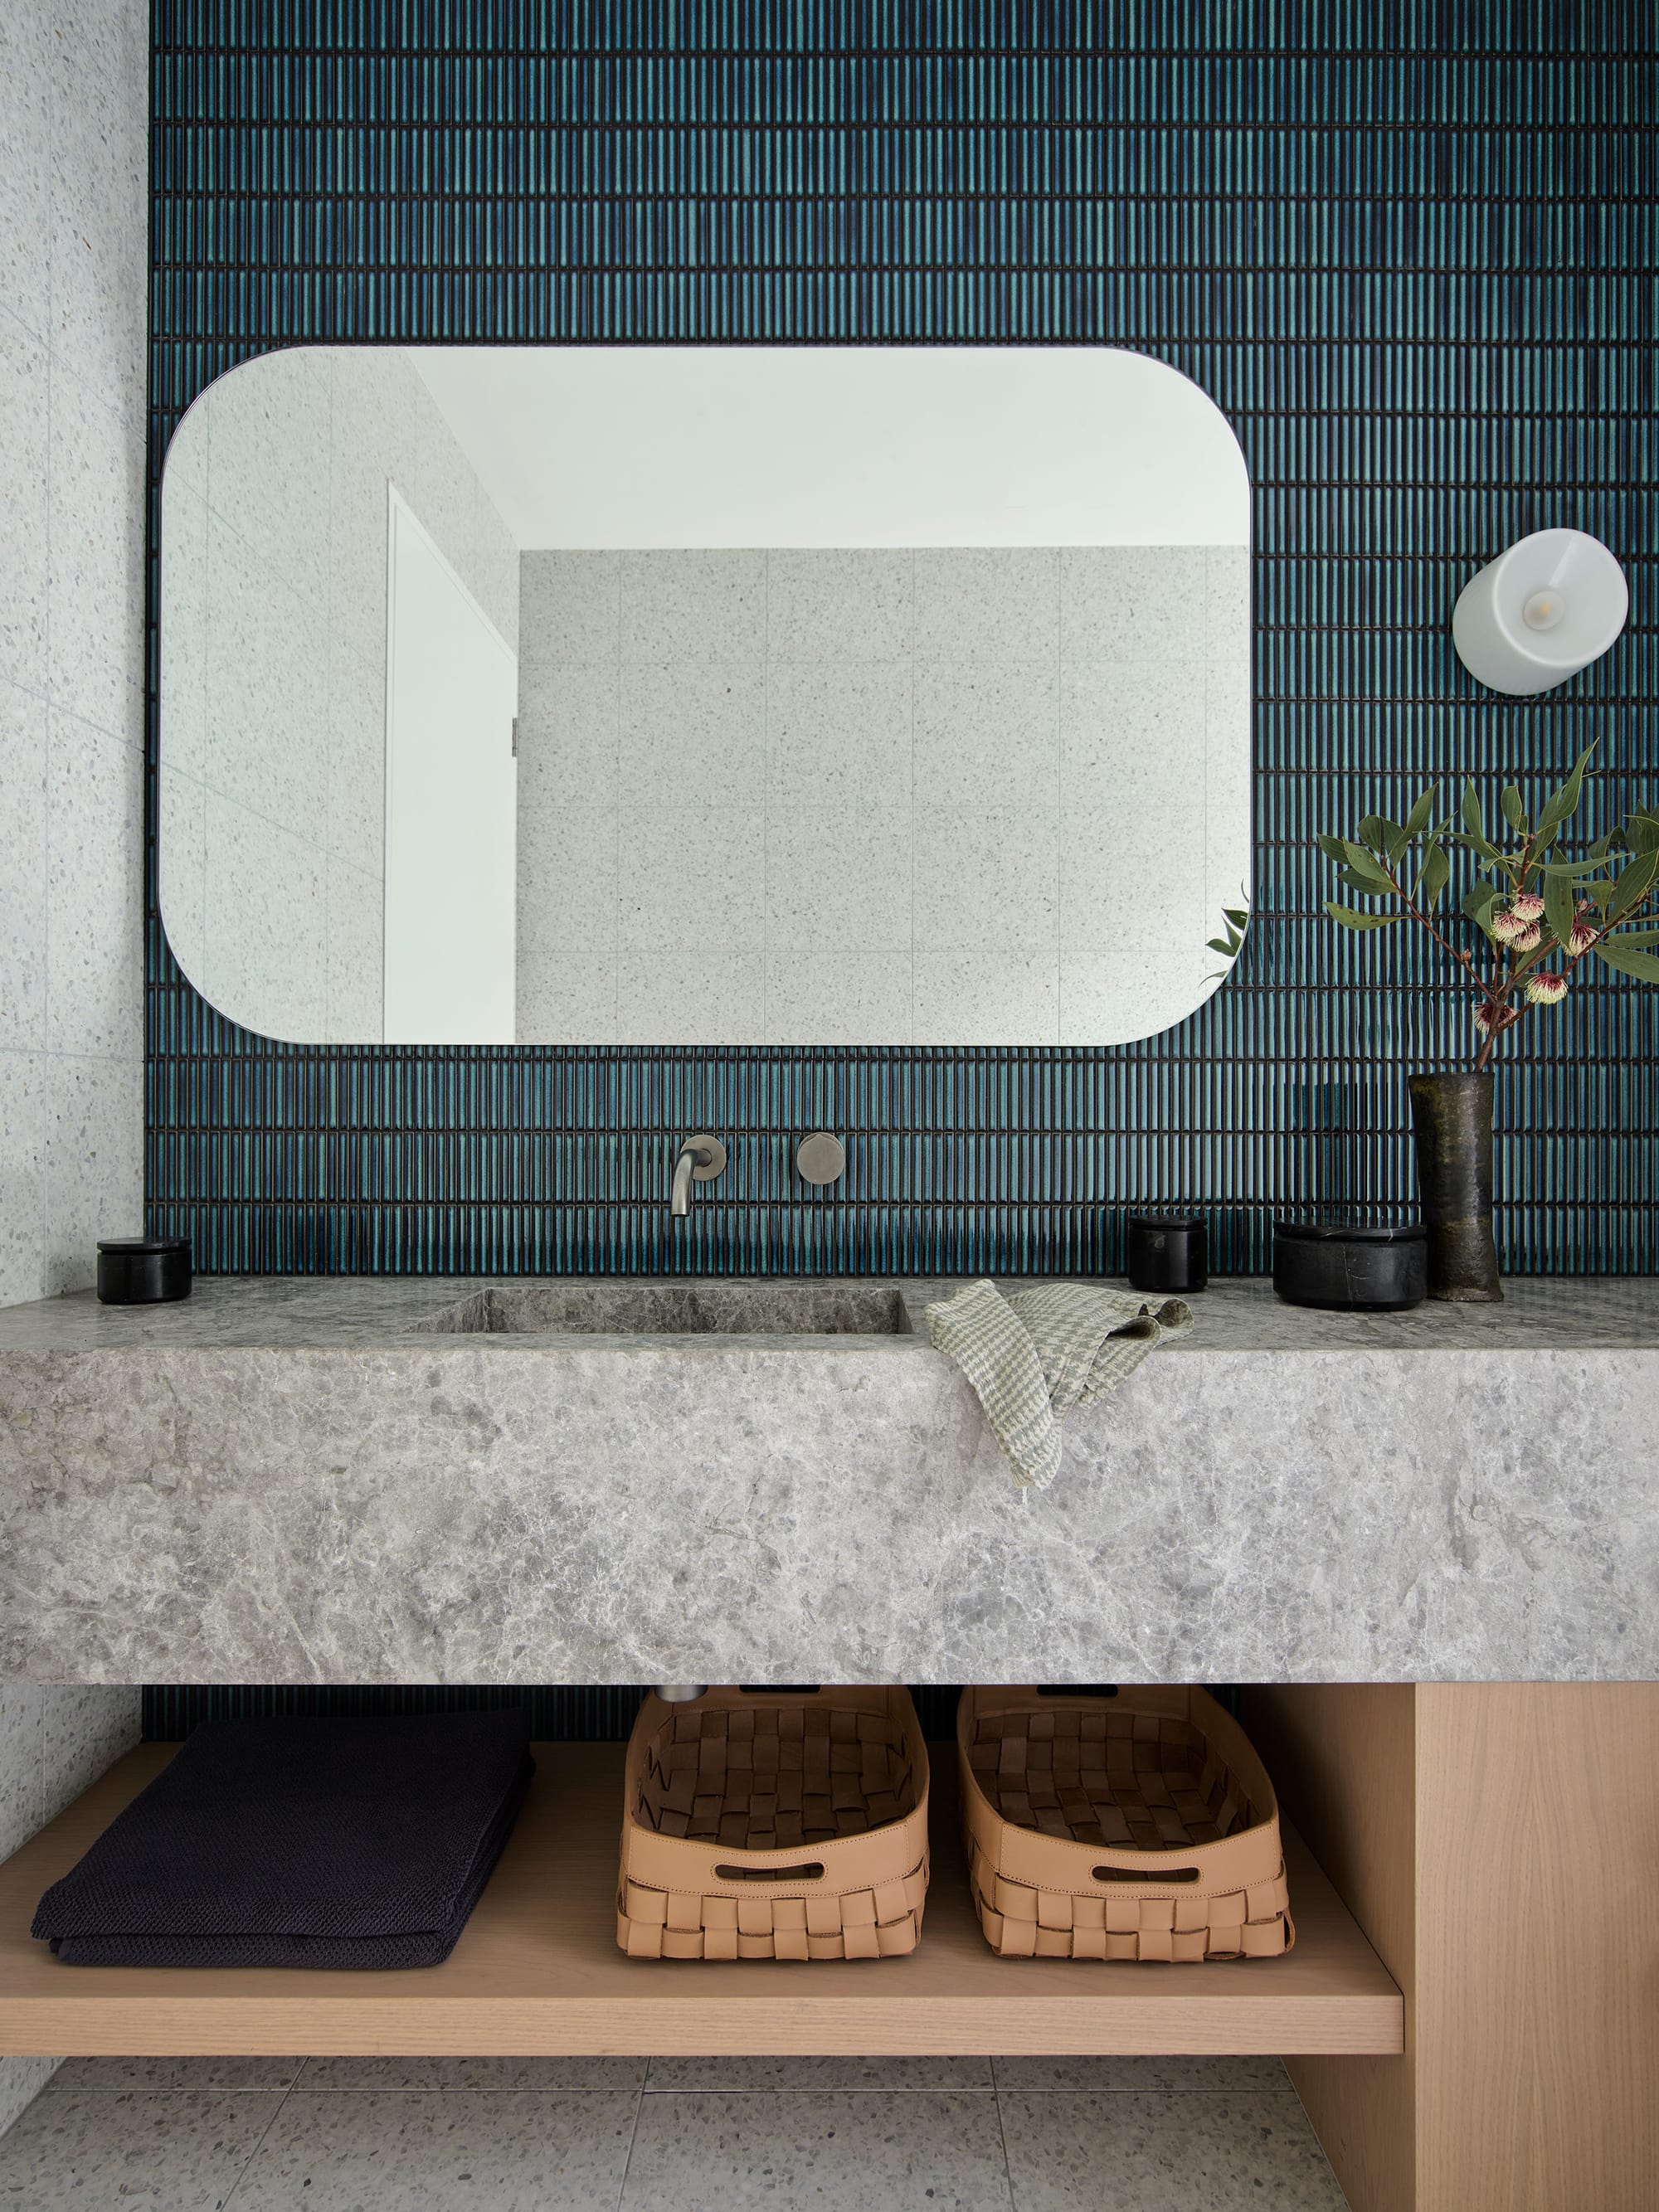 Warren House by CM Studio. Photography by Nic Gossage. Bathroom counter with grey stone countertop, blue finger tiles and timber counter. Open shelving and floating mirror.